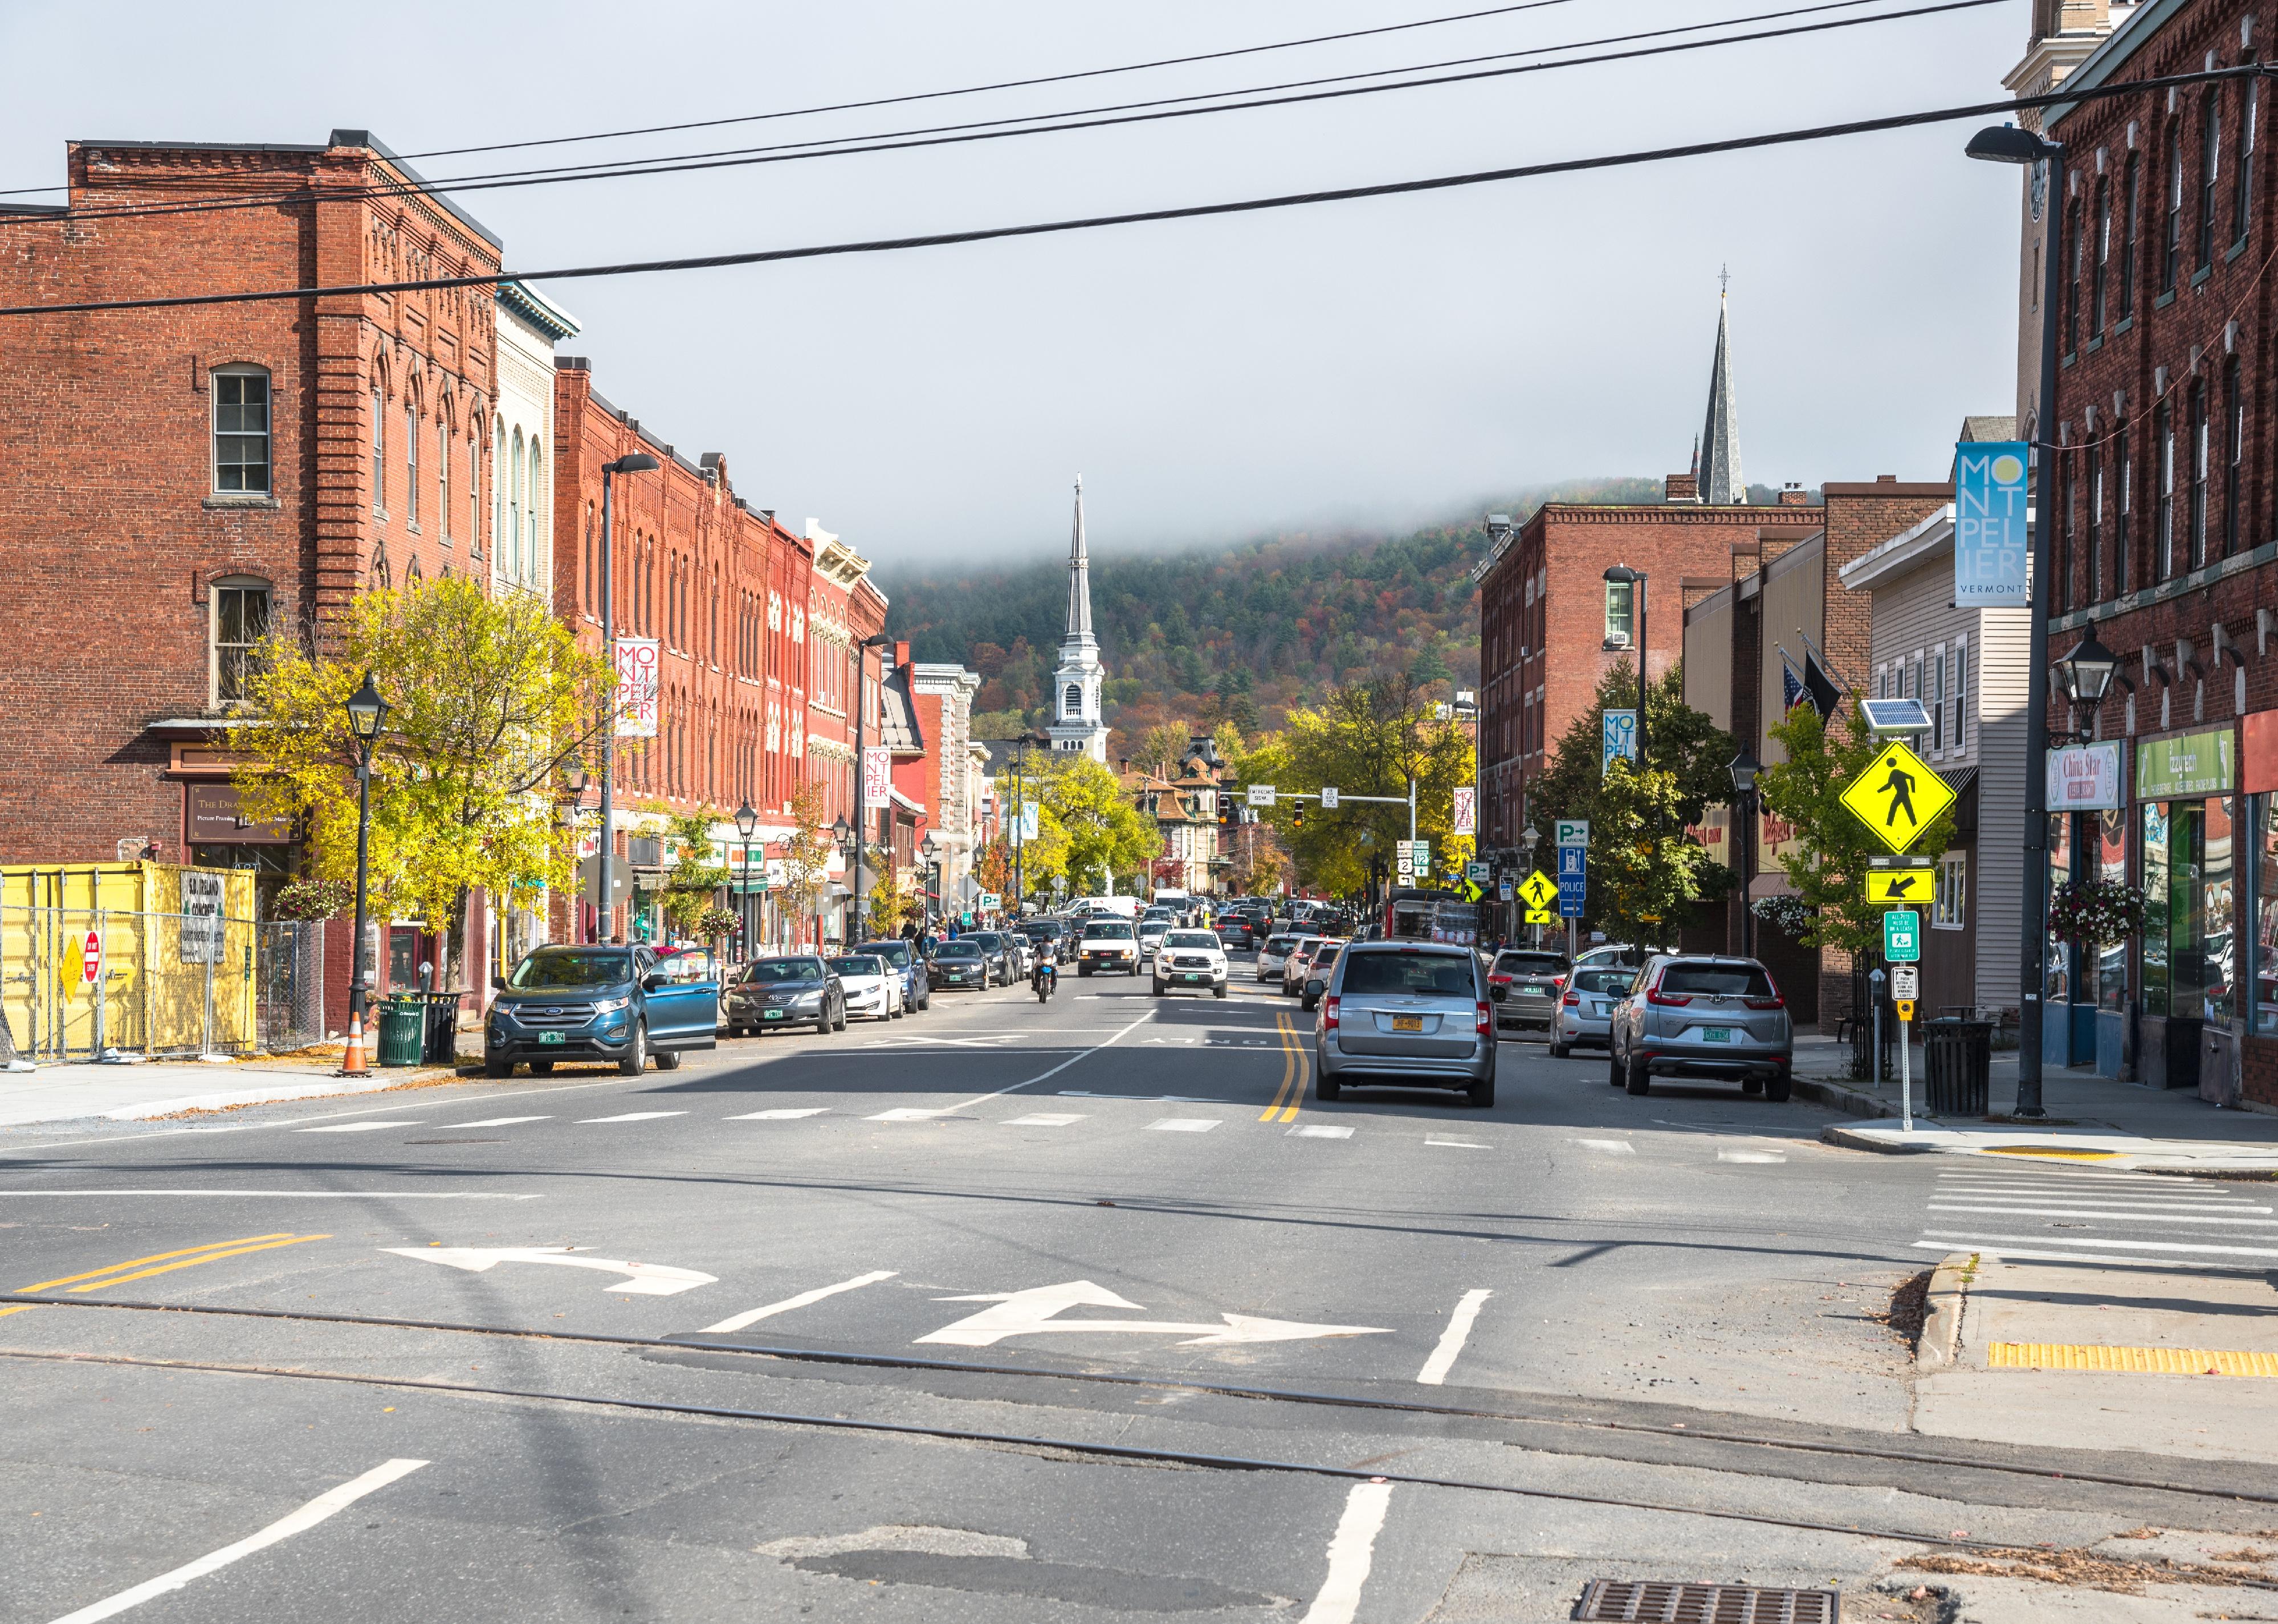 View of Main St. in Montpelier, VT.